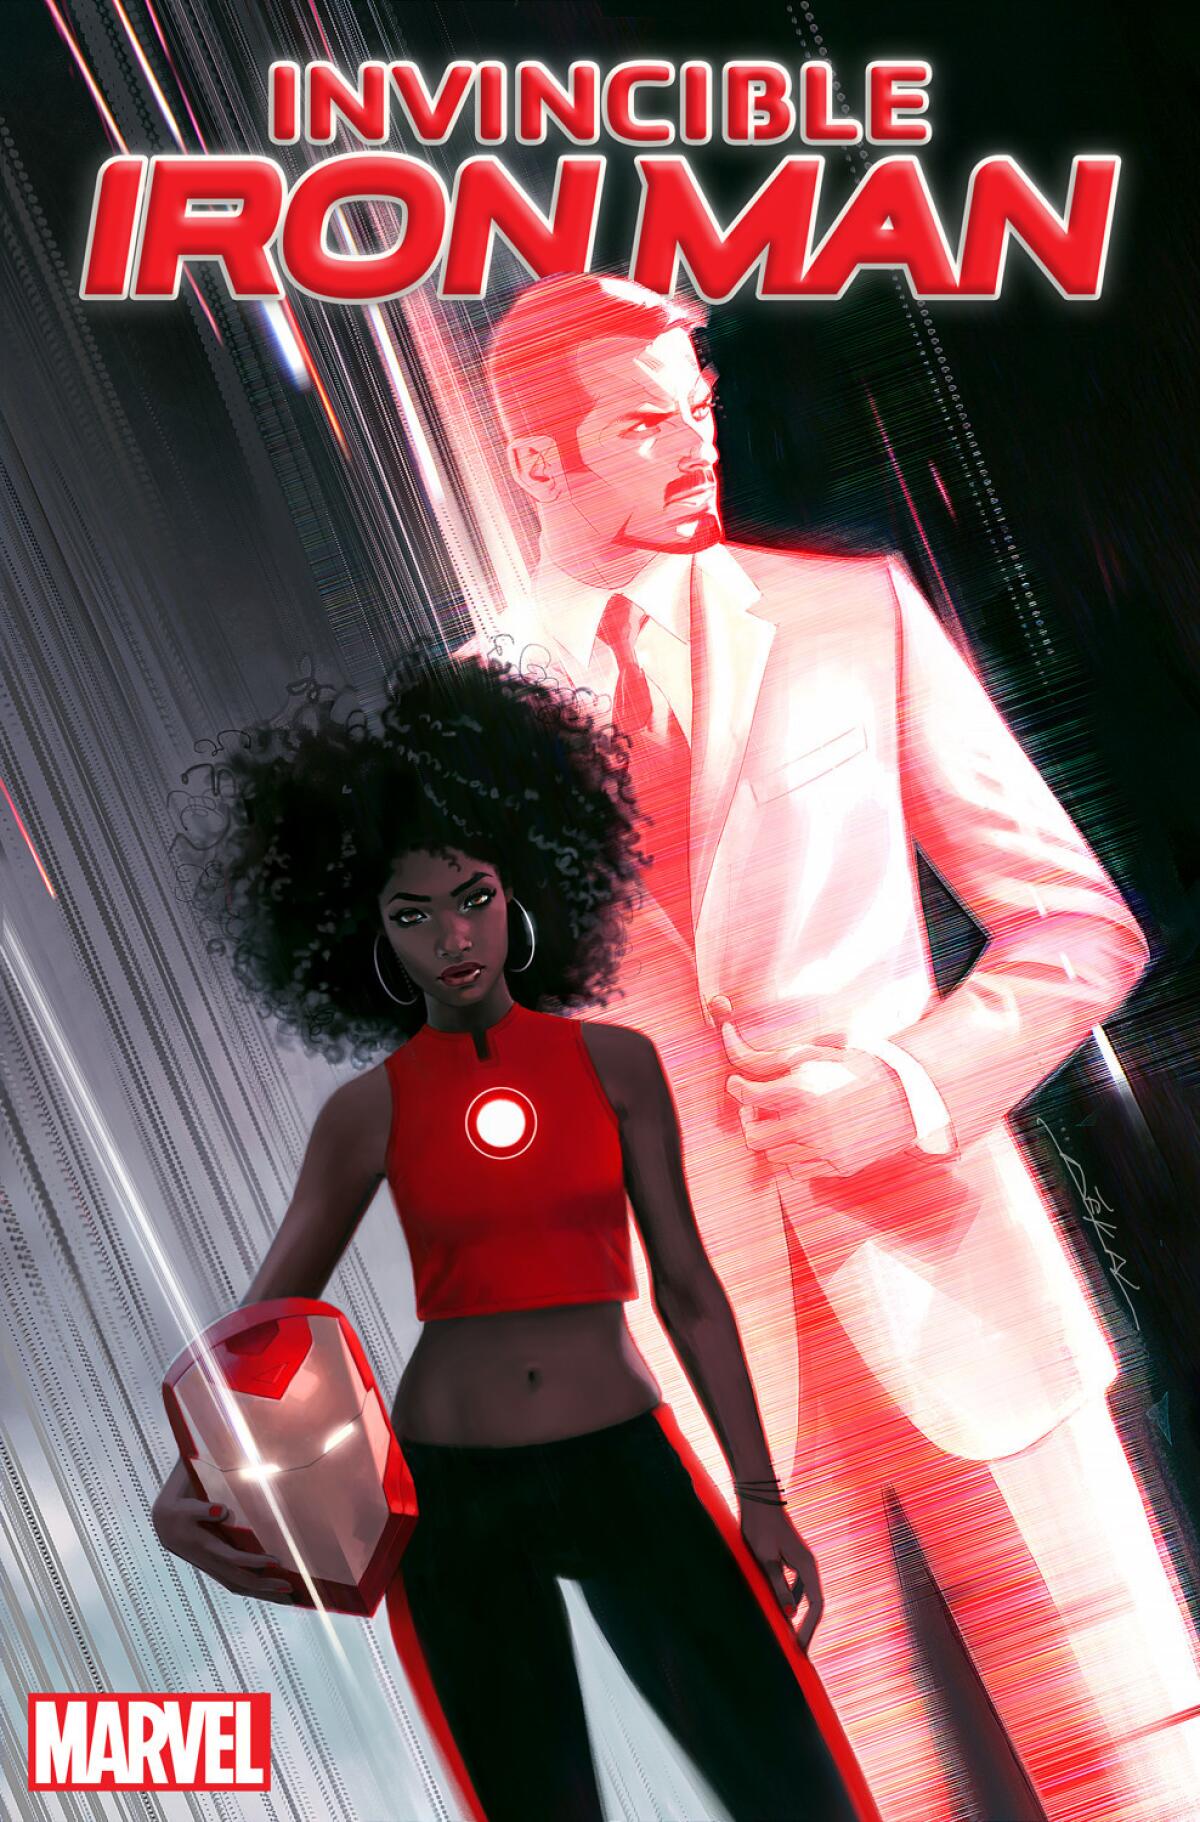 The cover of "Invincible Iron Man" with Riri Williams. (Jeff Dekal / Marvel)